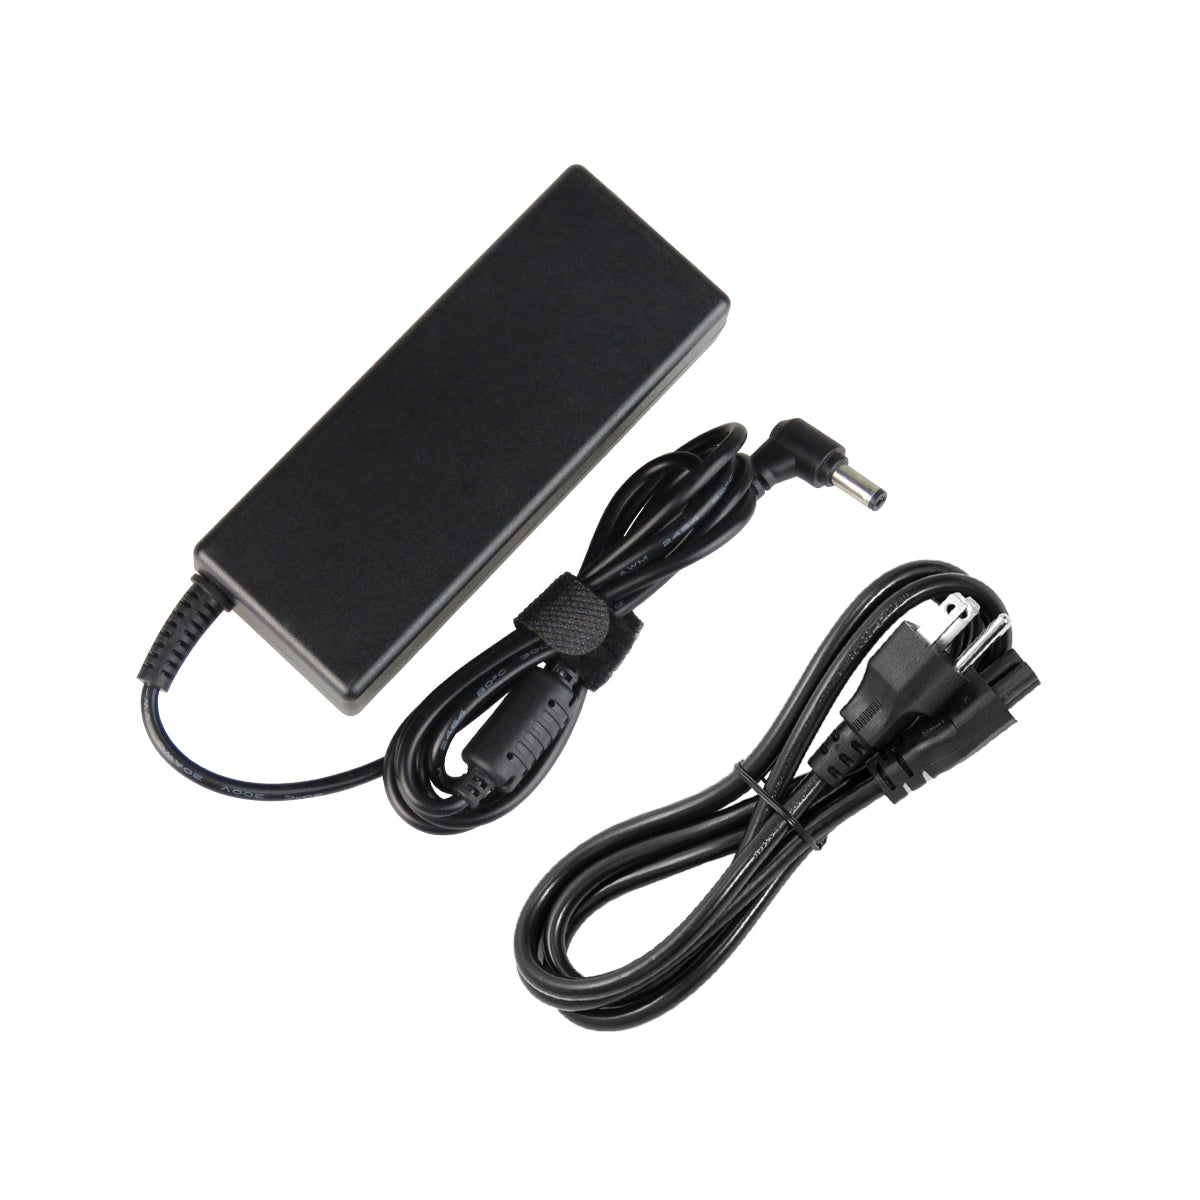 AC Adapter Charger for Toshiba Satellite c55-a5282 Notebook.